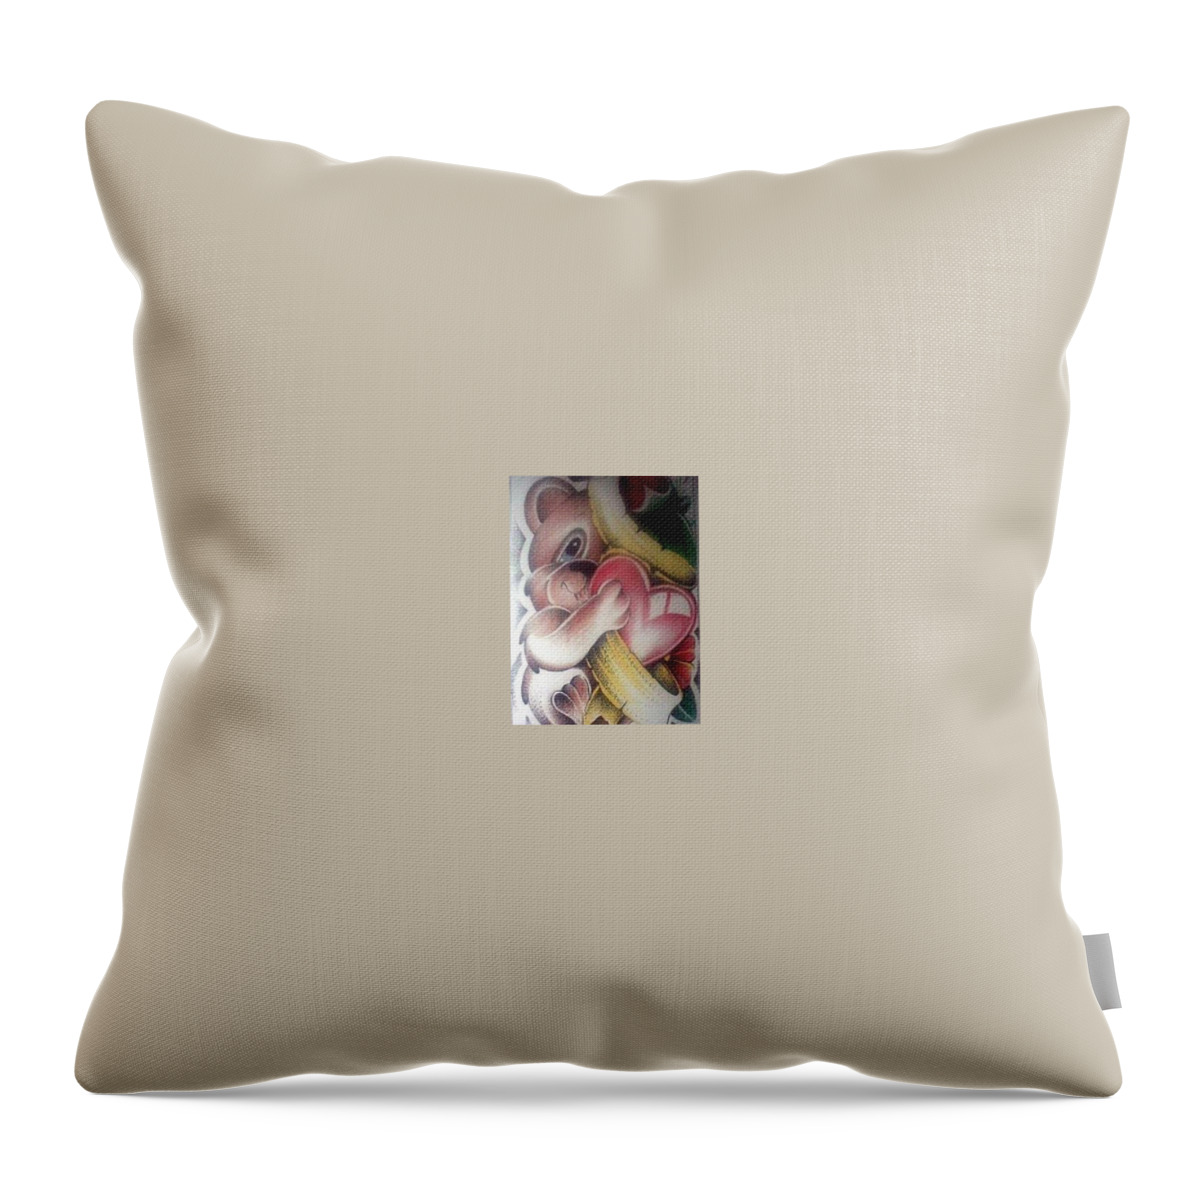 Black Art Throw Pillow featuring the drawing Untitled #2 by Maru 